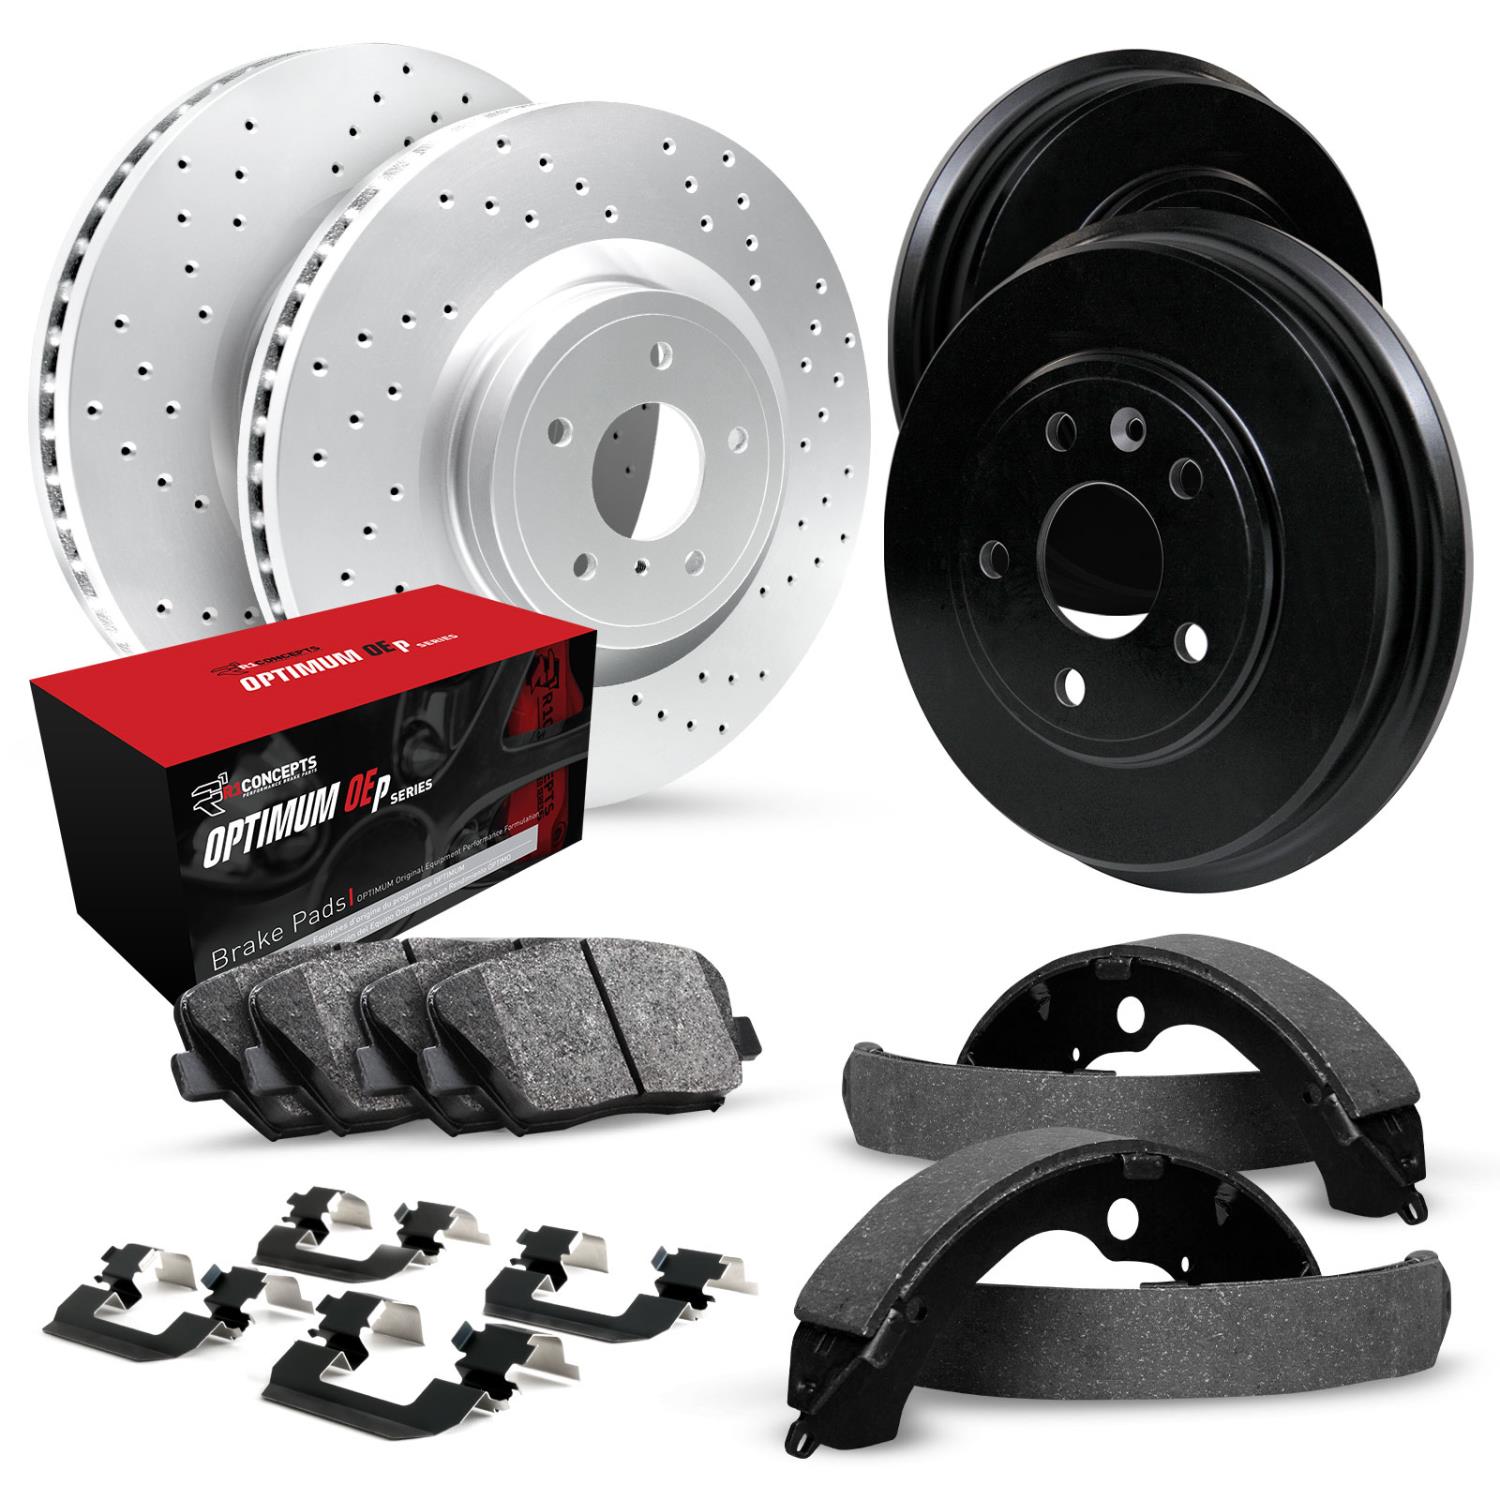 GEO-Carbon Drilled Brake Rotor & Drum Set w/Optimum OE Pads, Shoes, & Hardware, 1988-1989 GM, Position: Front & Rear